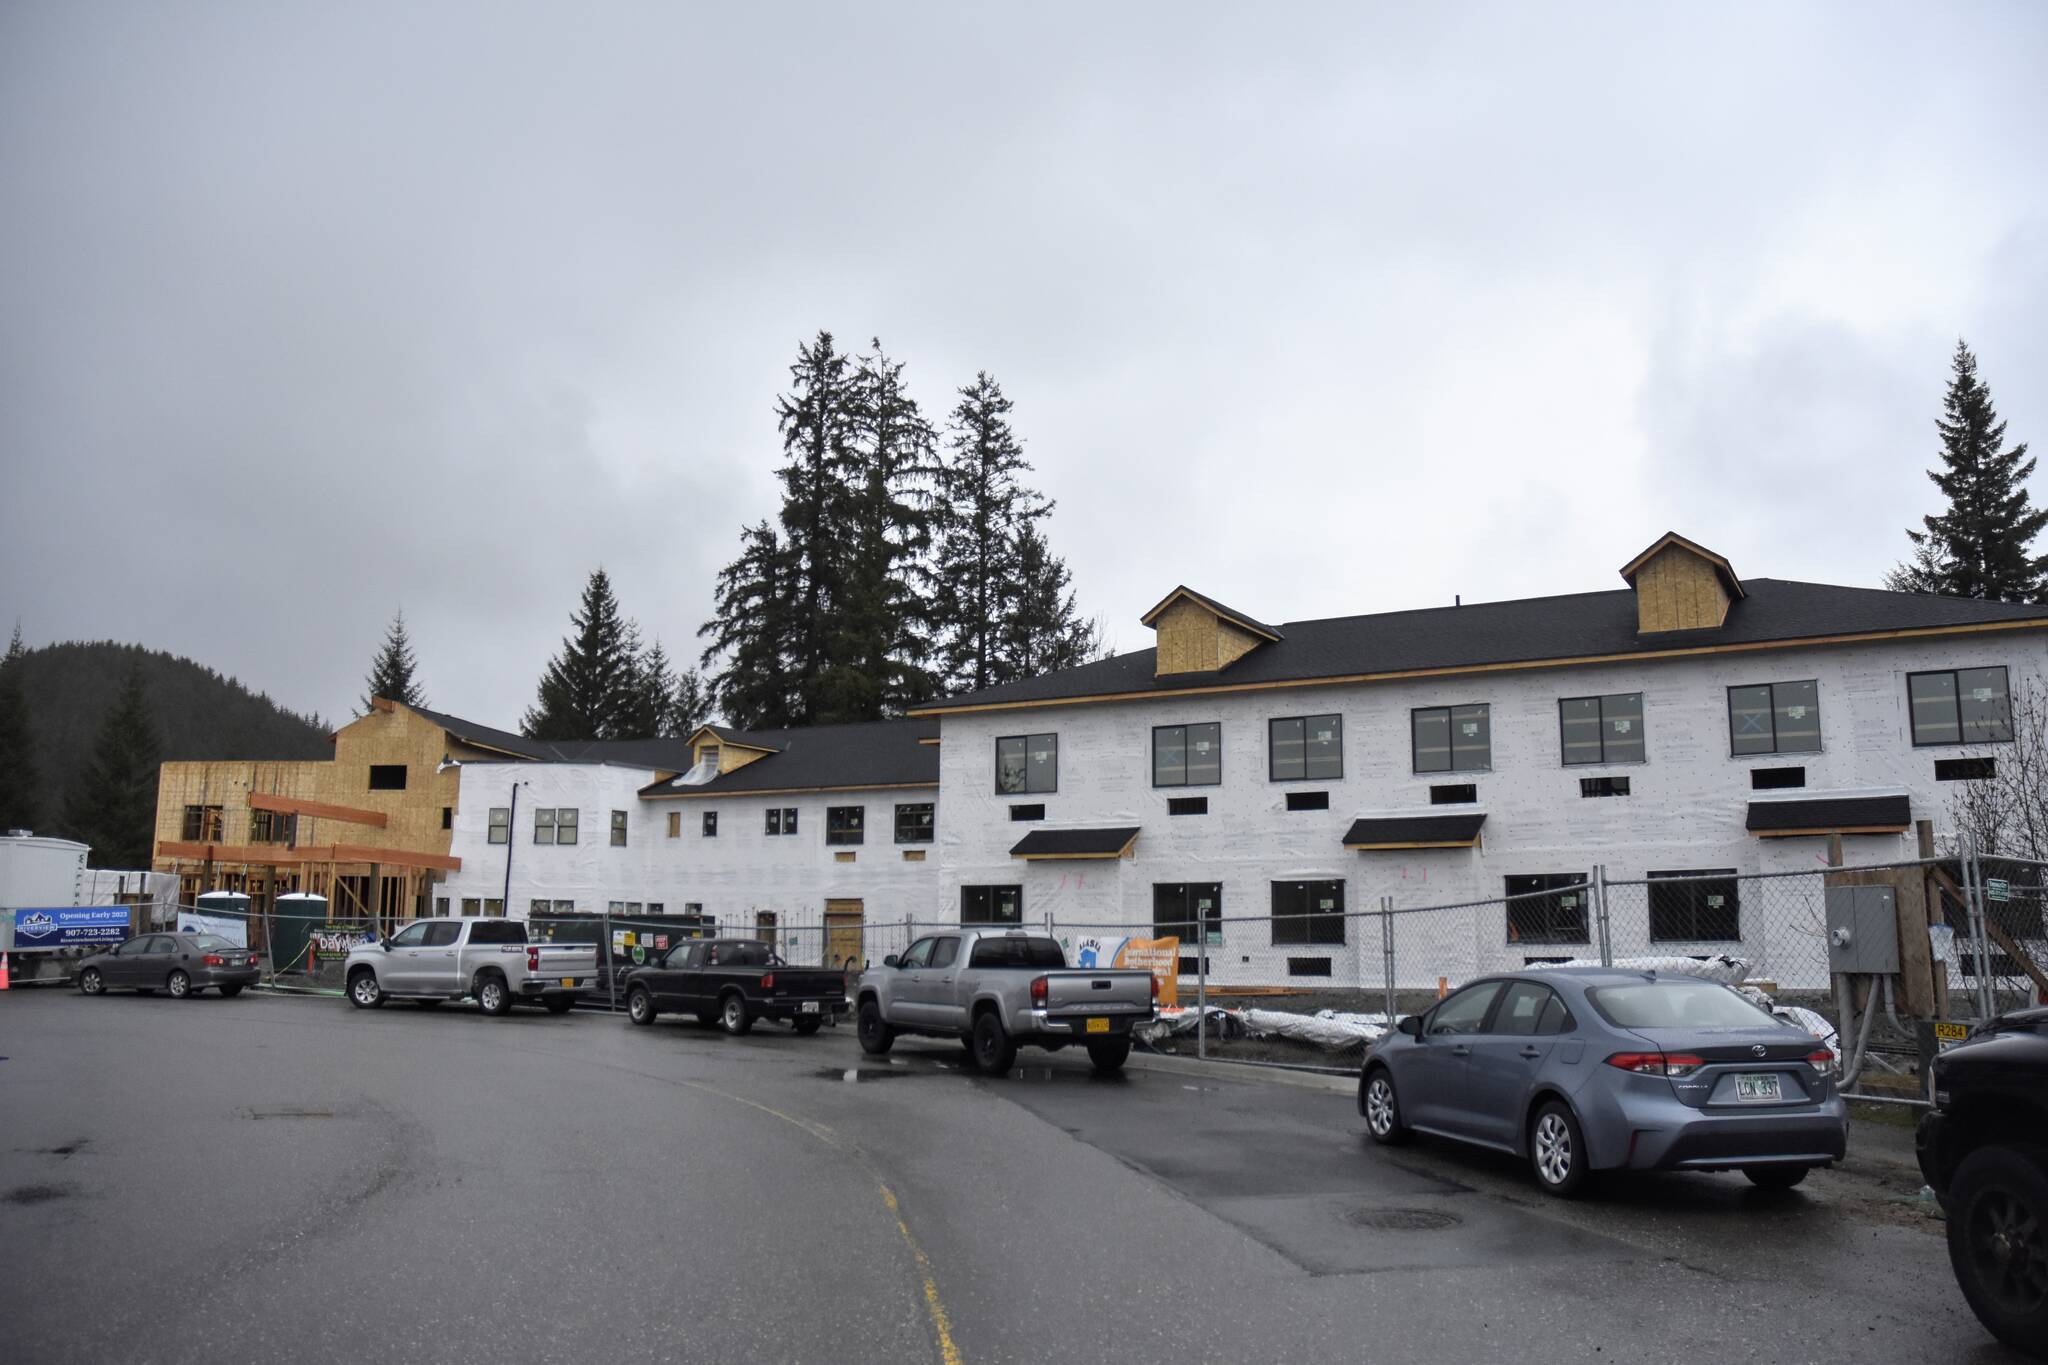 The Riverview Senior Living facility is under construction on Clinton Drive in the Mendenhall Valley on Monday, May 2, 2022. Senior living has been an issue for Juneau and the facility received financial support from the city. The projects promoters say they've already received a number of applications. (Peter Segall / Juneau Empire)